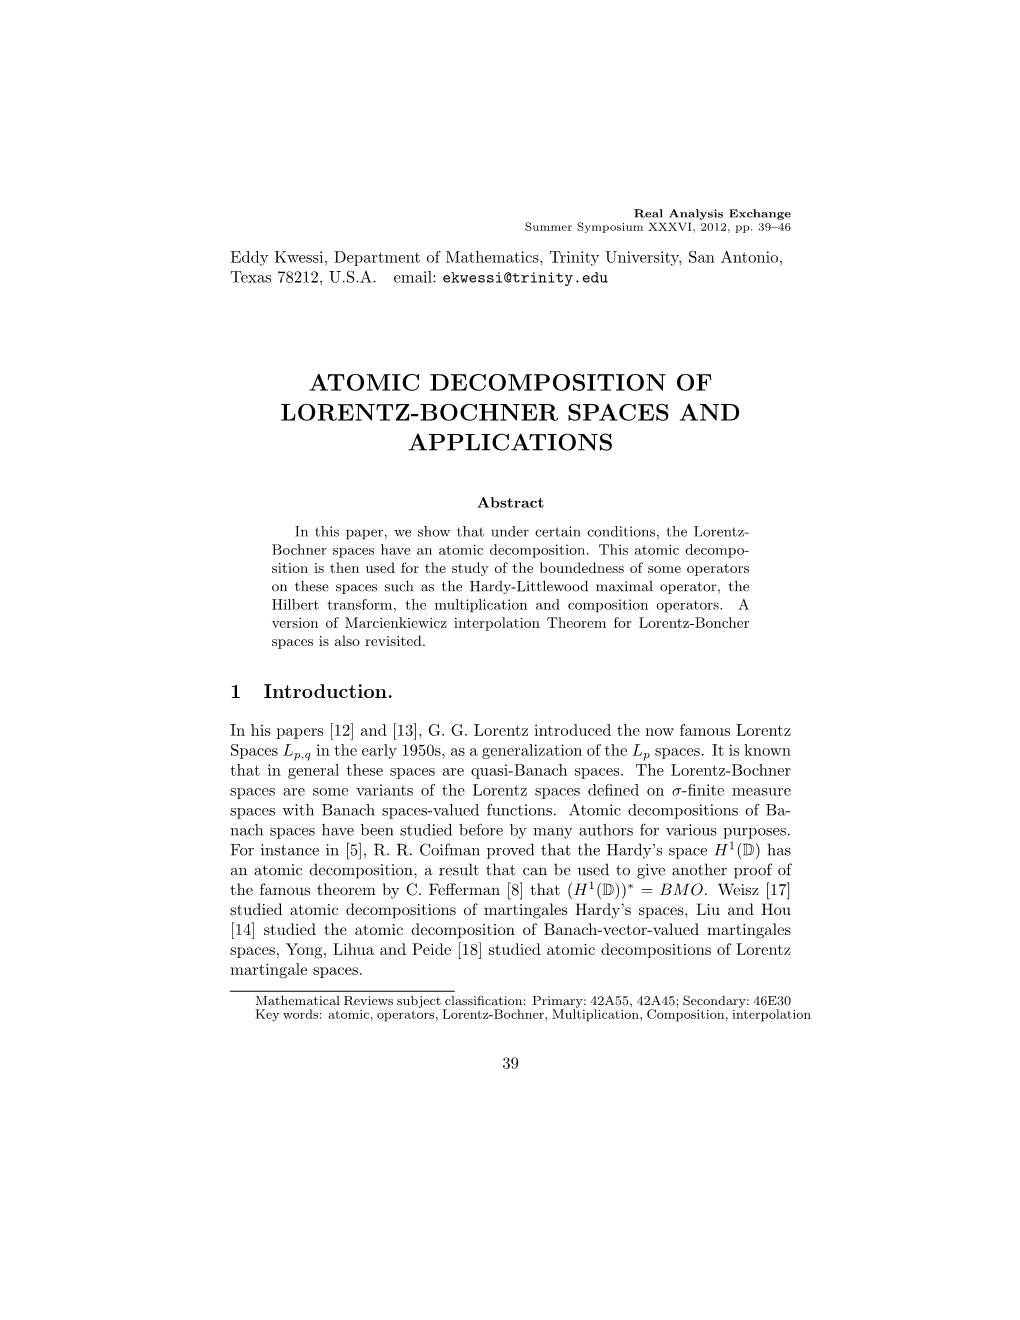 Atomic Decomposition of Lorentz-Bochner Spaces and Applications